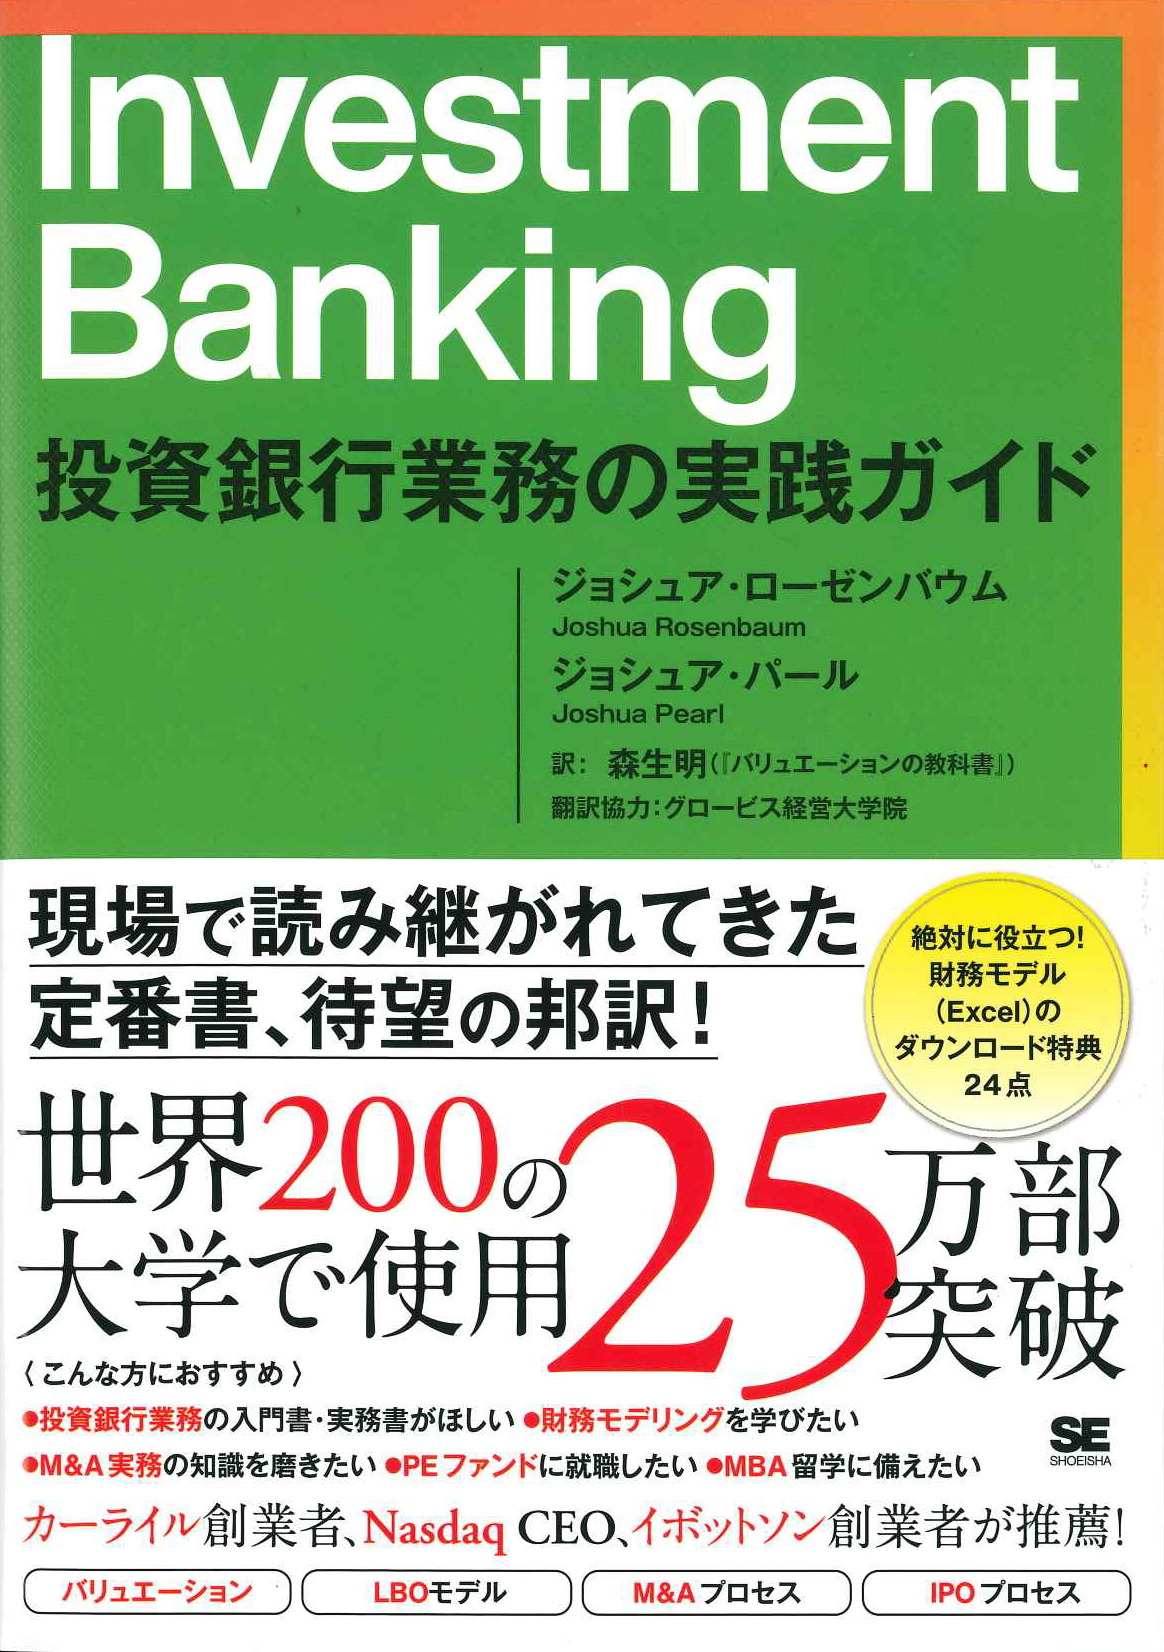 『Investment Banking 投資銀行業務の実践ガイド』